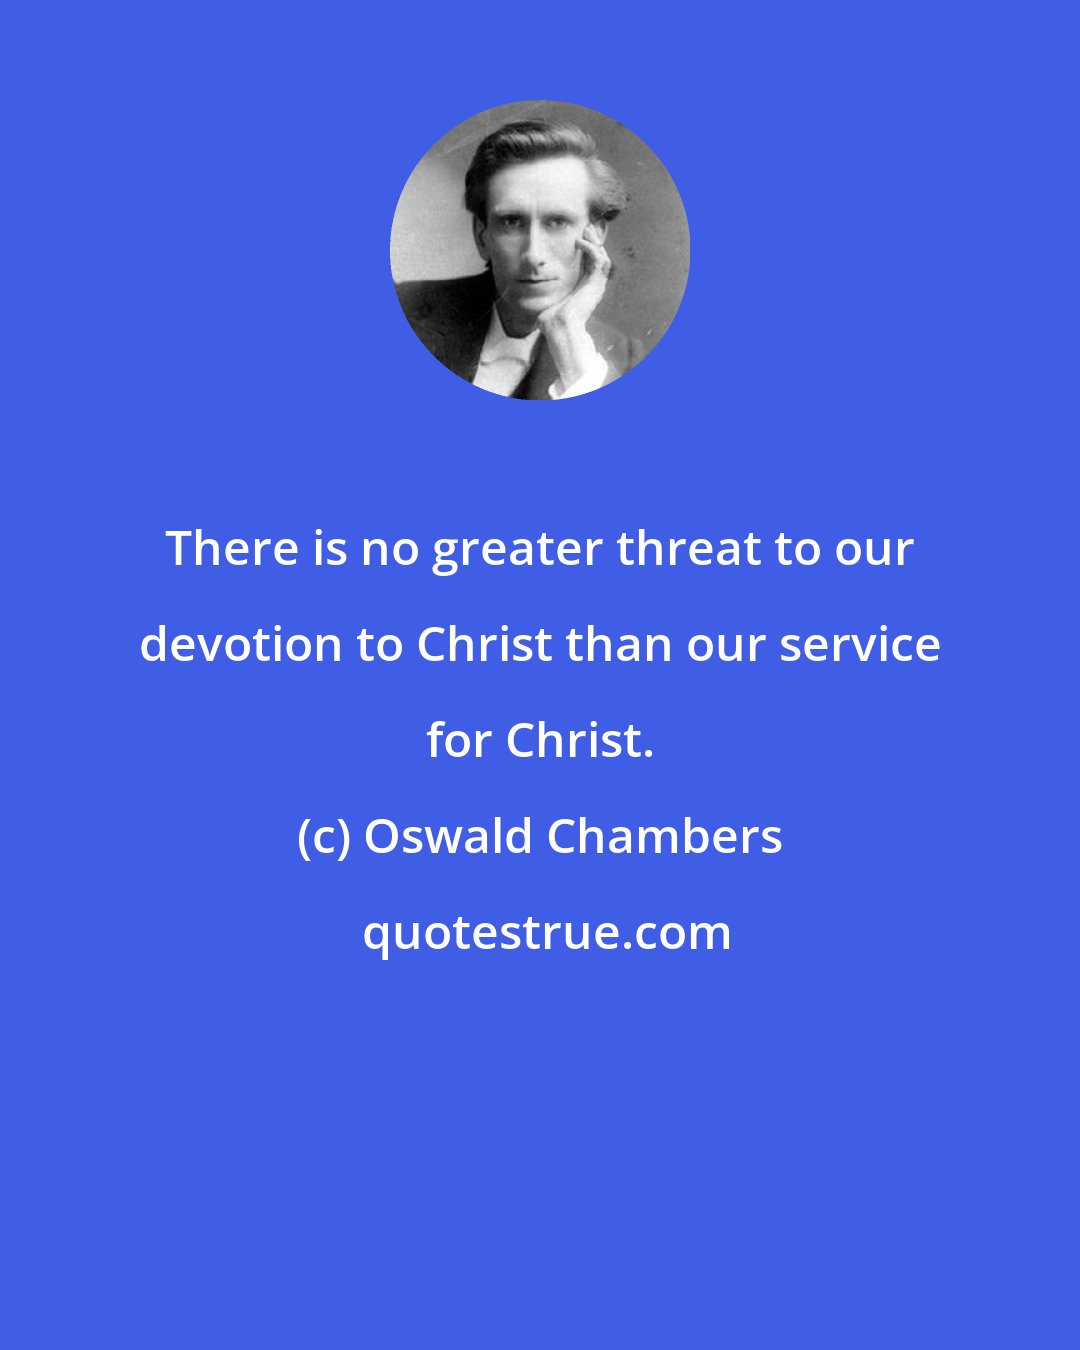 Oswald Chambers: There is no greater threat to our devotion to Christ than our service for Christ.